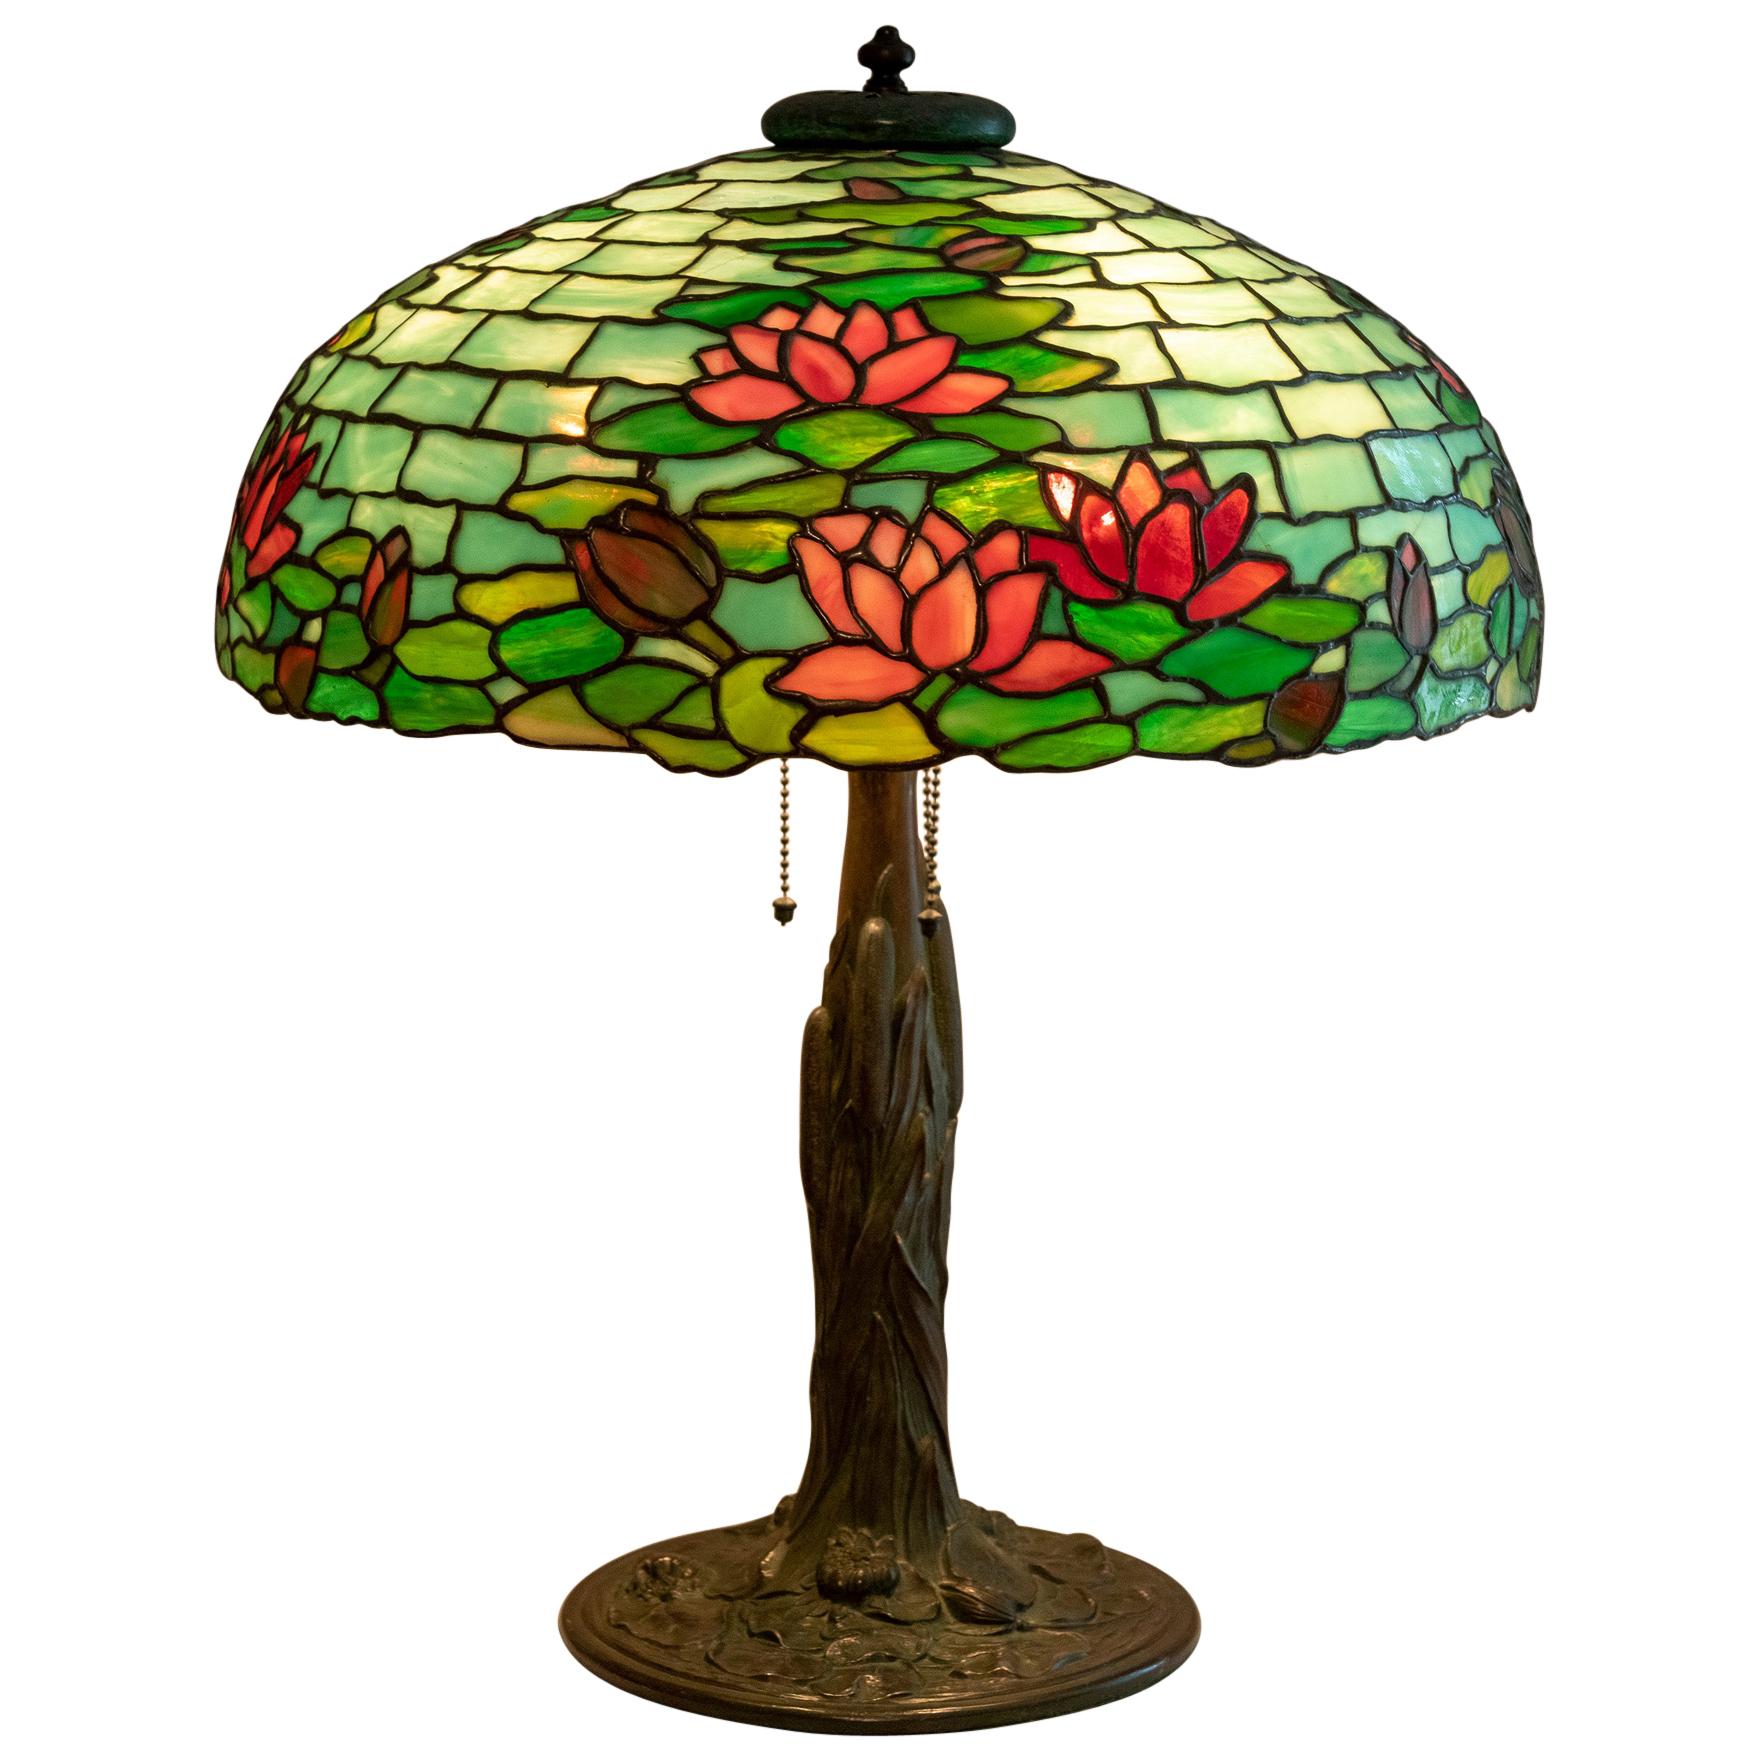 Large Antique Leaded Glass Water Lily Table Lamp, by Duffner & Kimberly, 1905